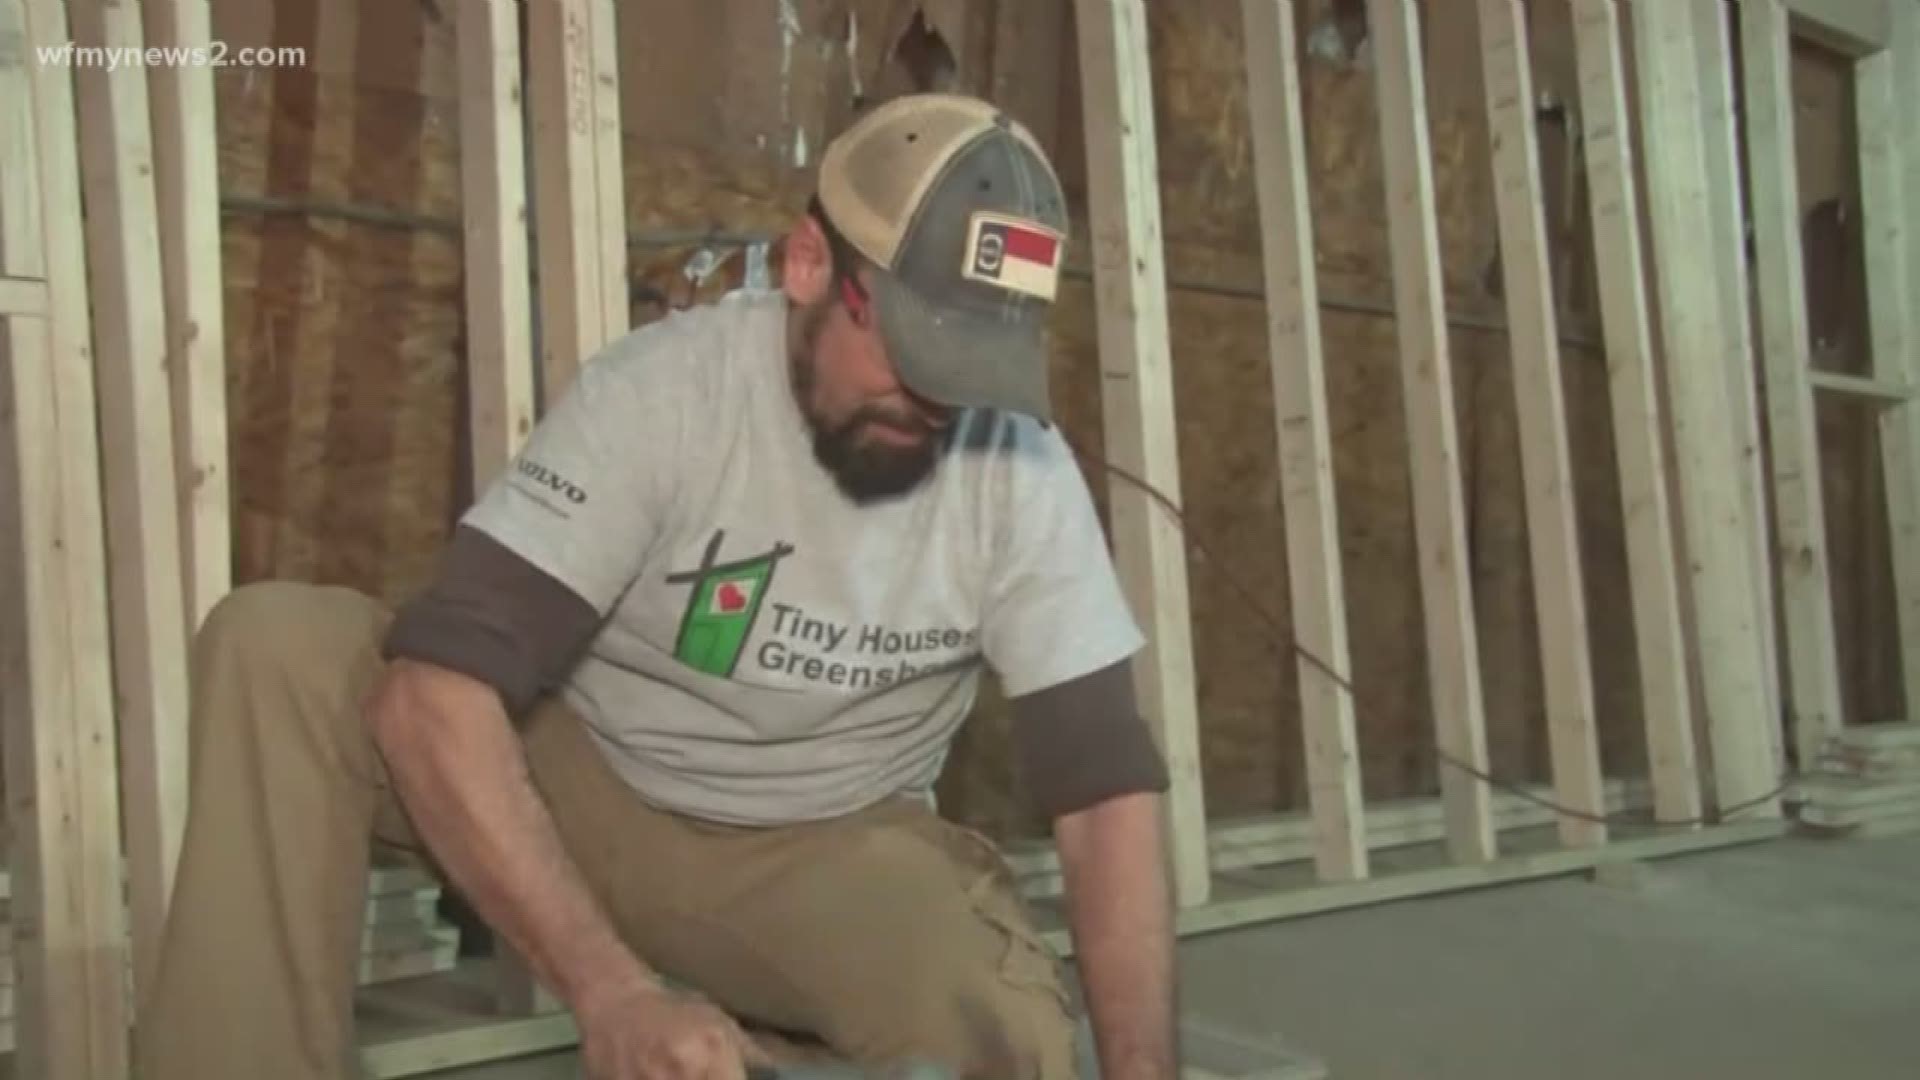 Money funded from recycling scrap metals turns into funds to build tiny homes for people who are homeless.